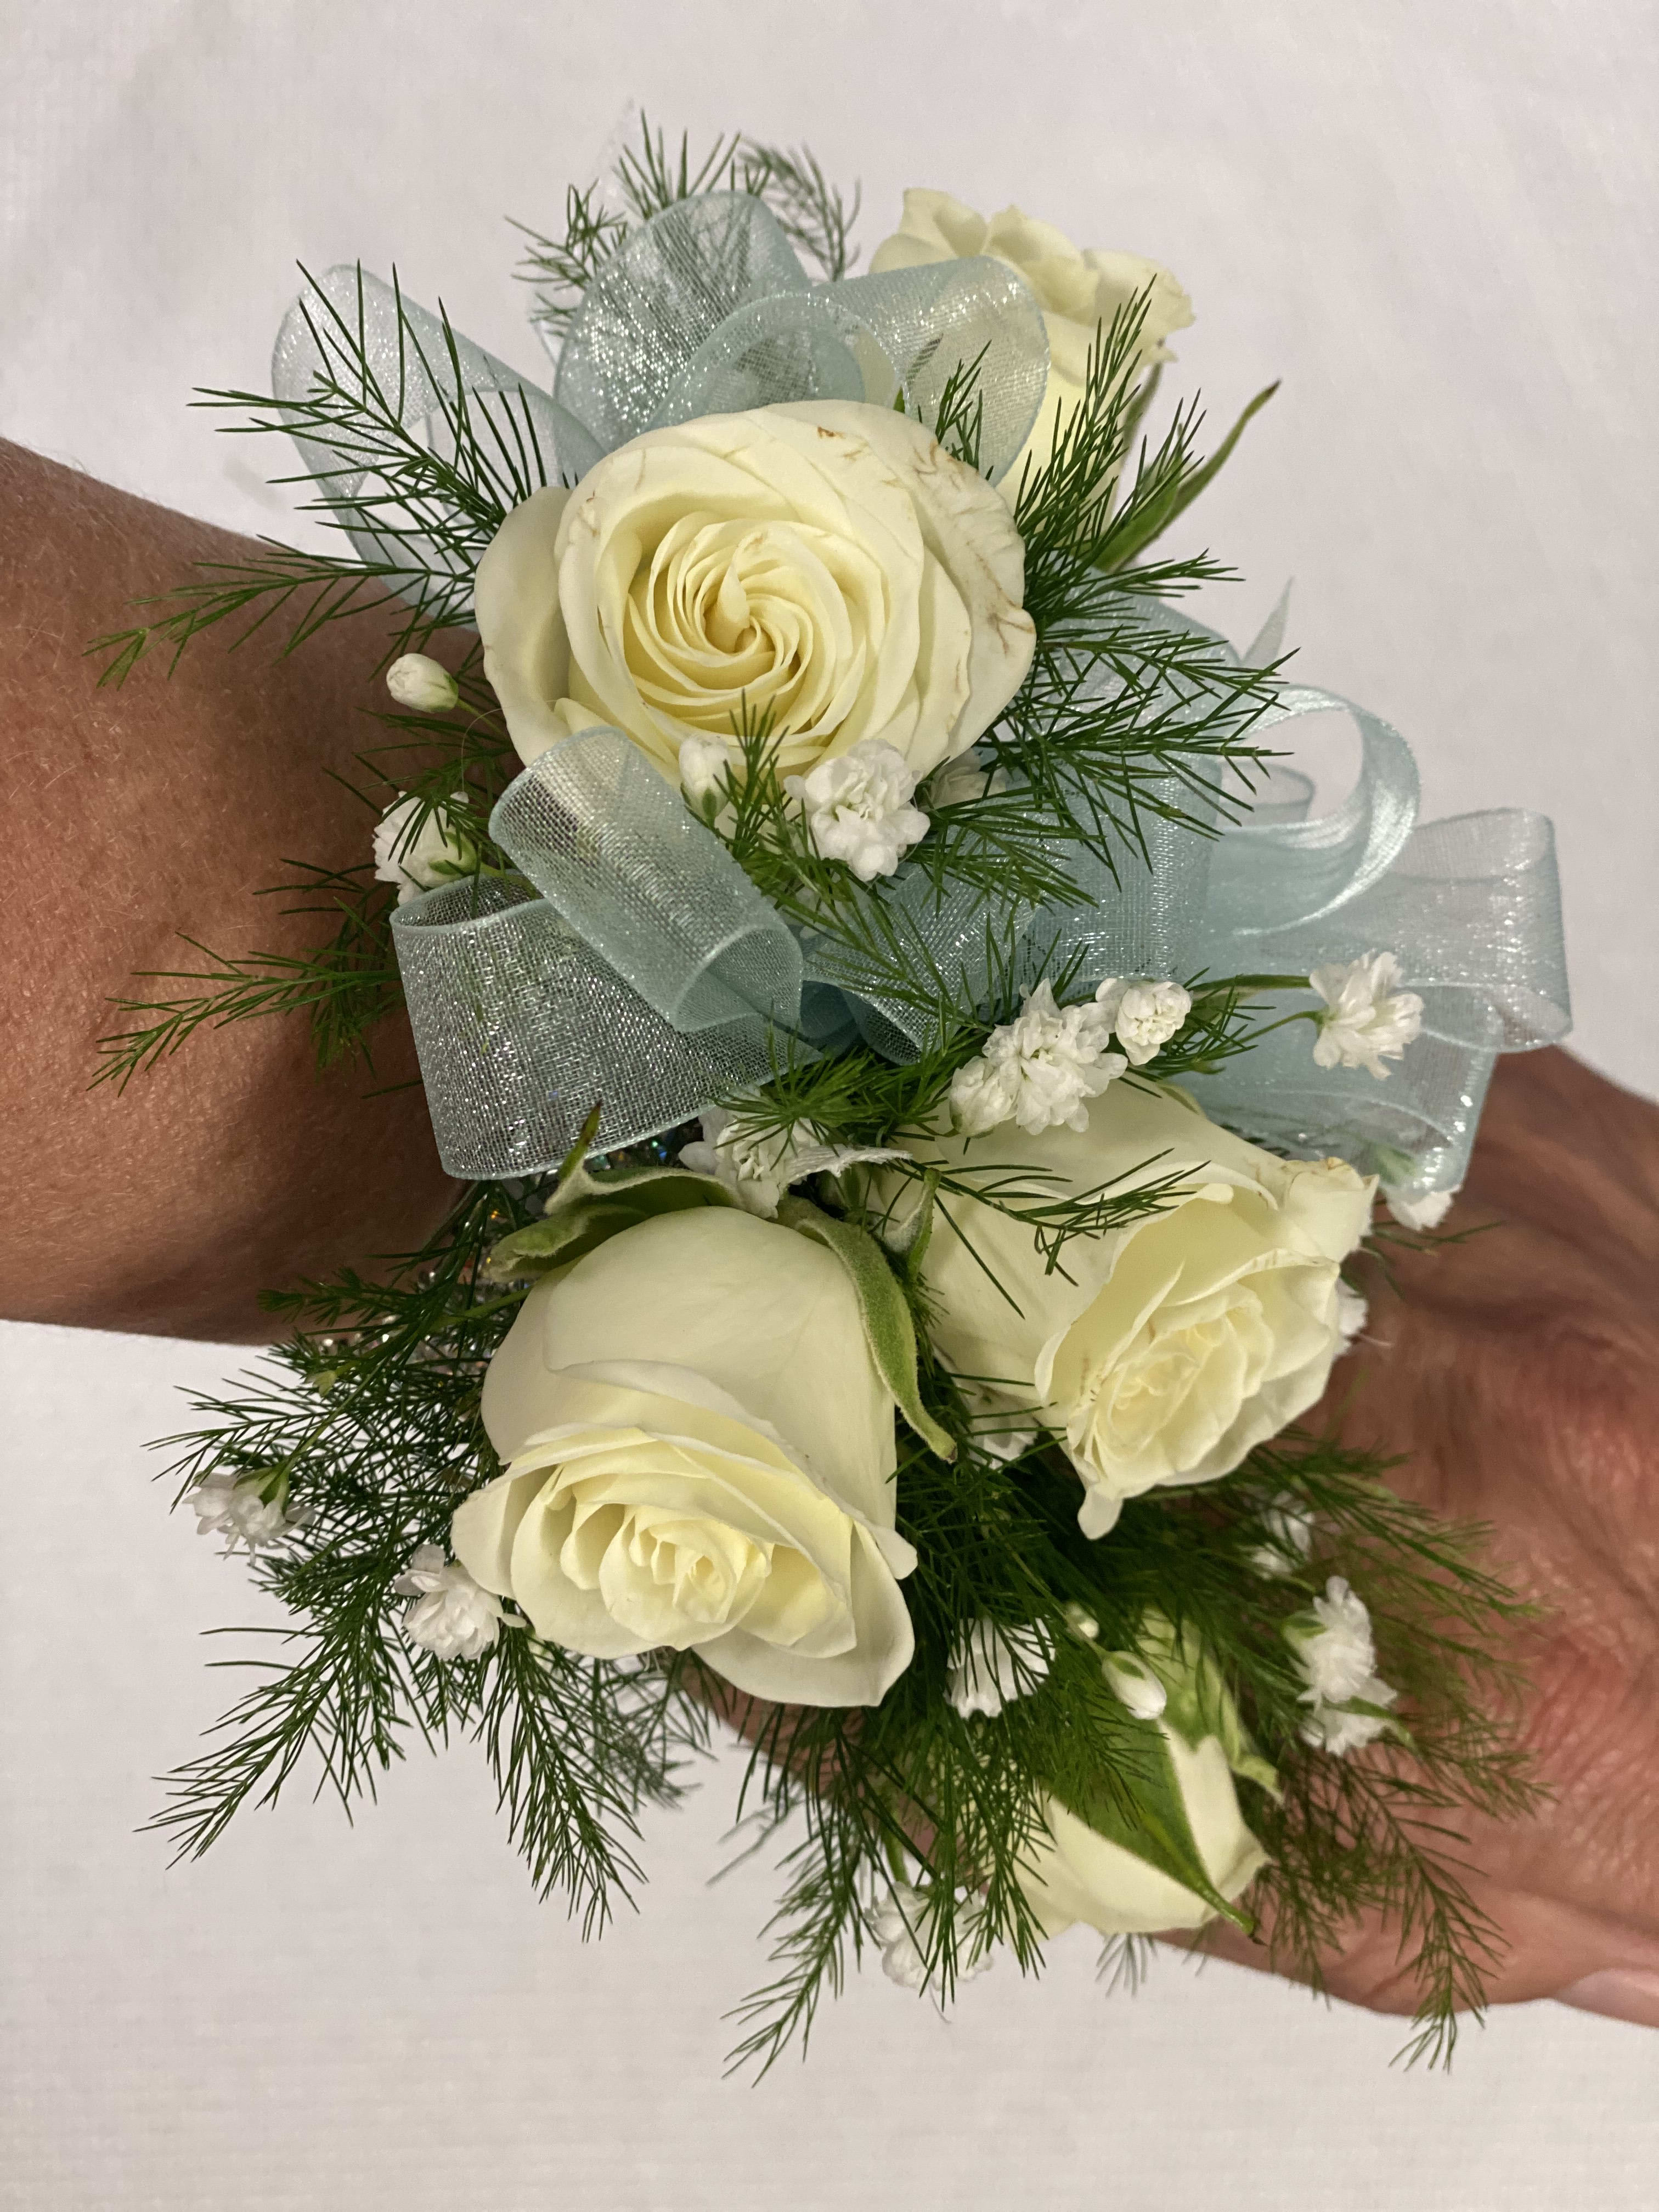 Light Blue Wrist Corsage in East Rochester, NY